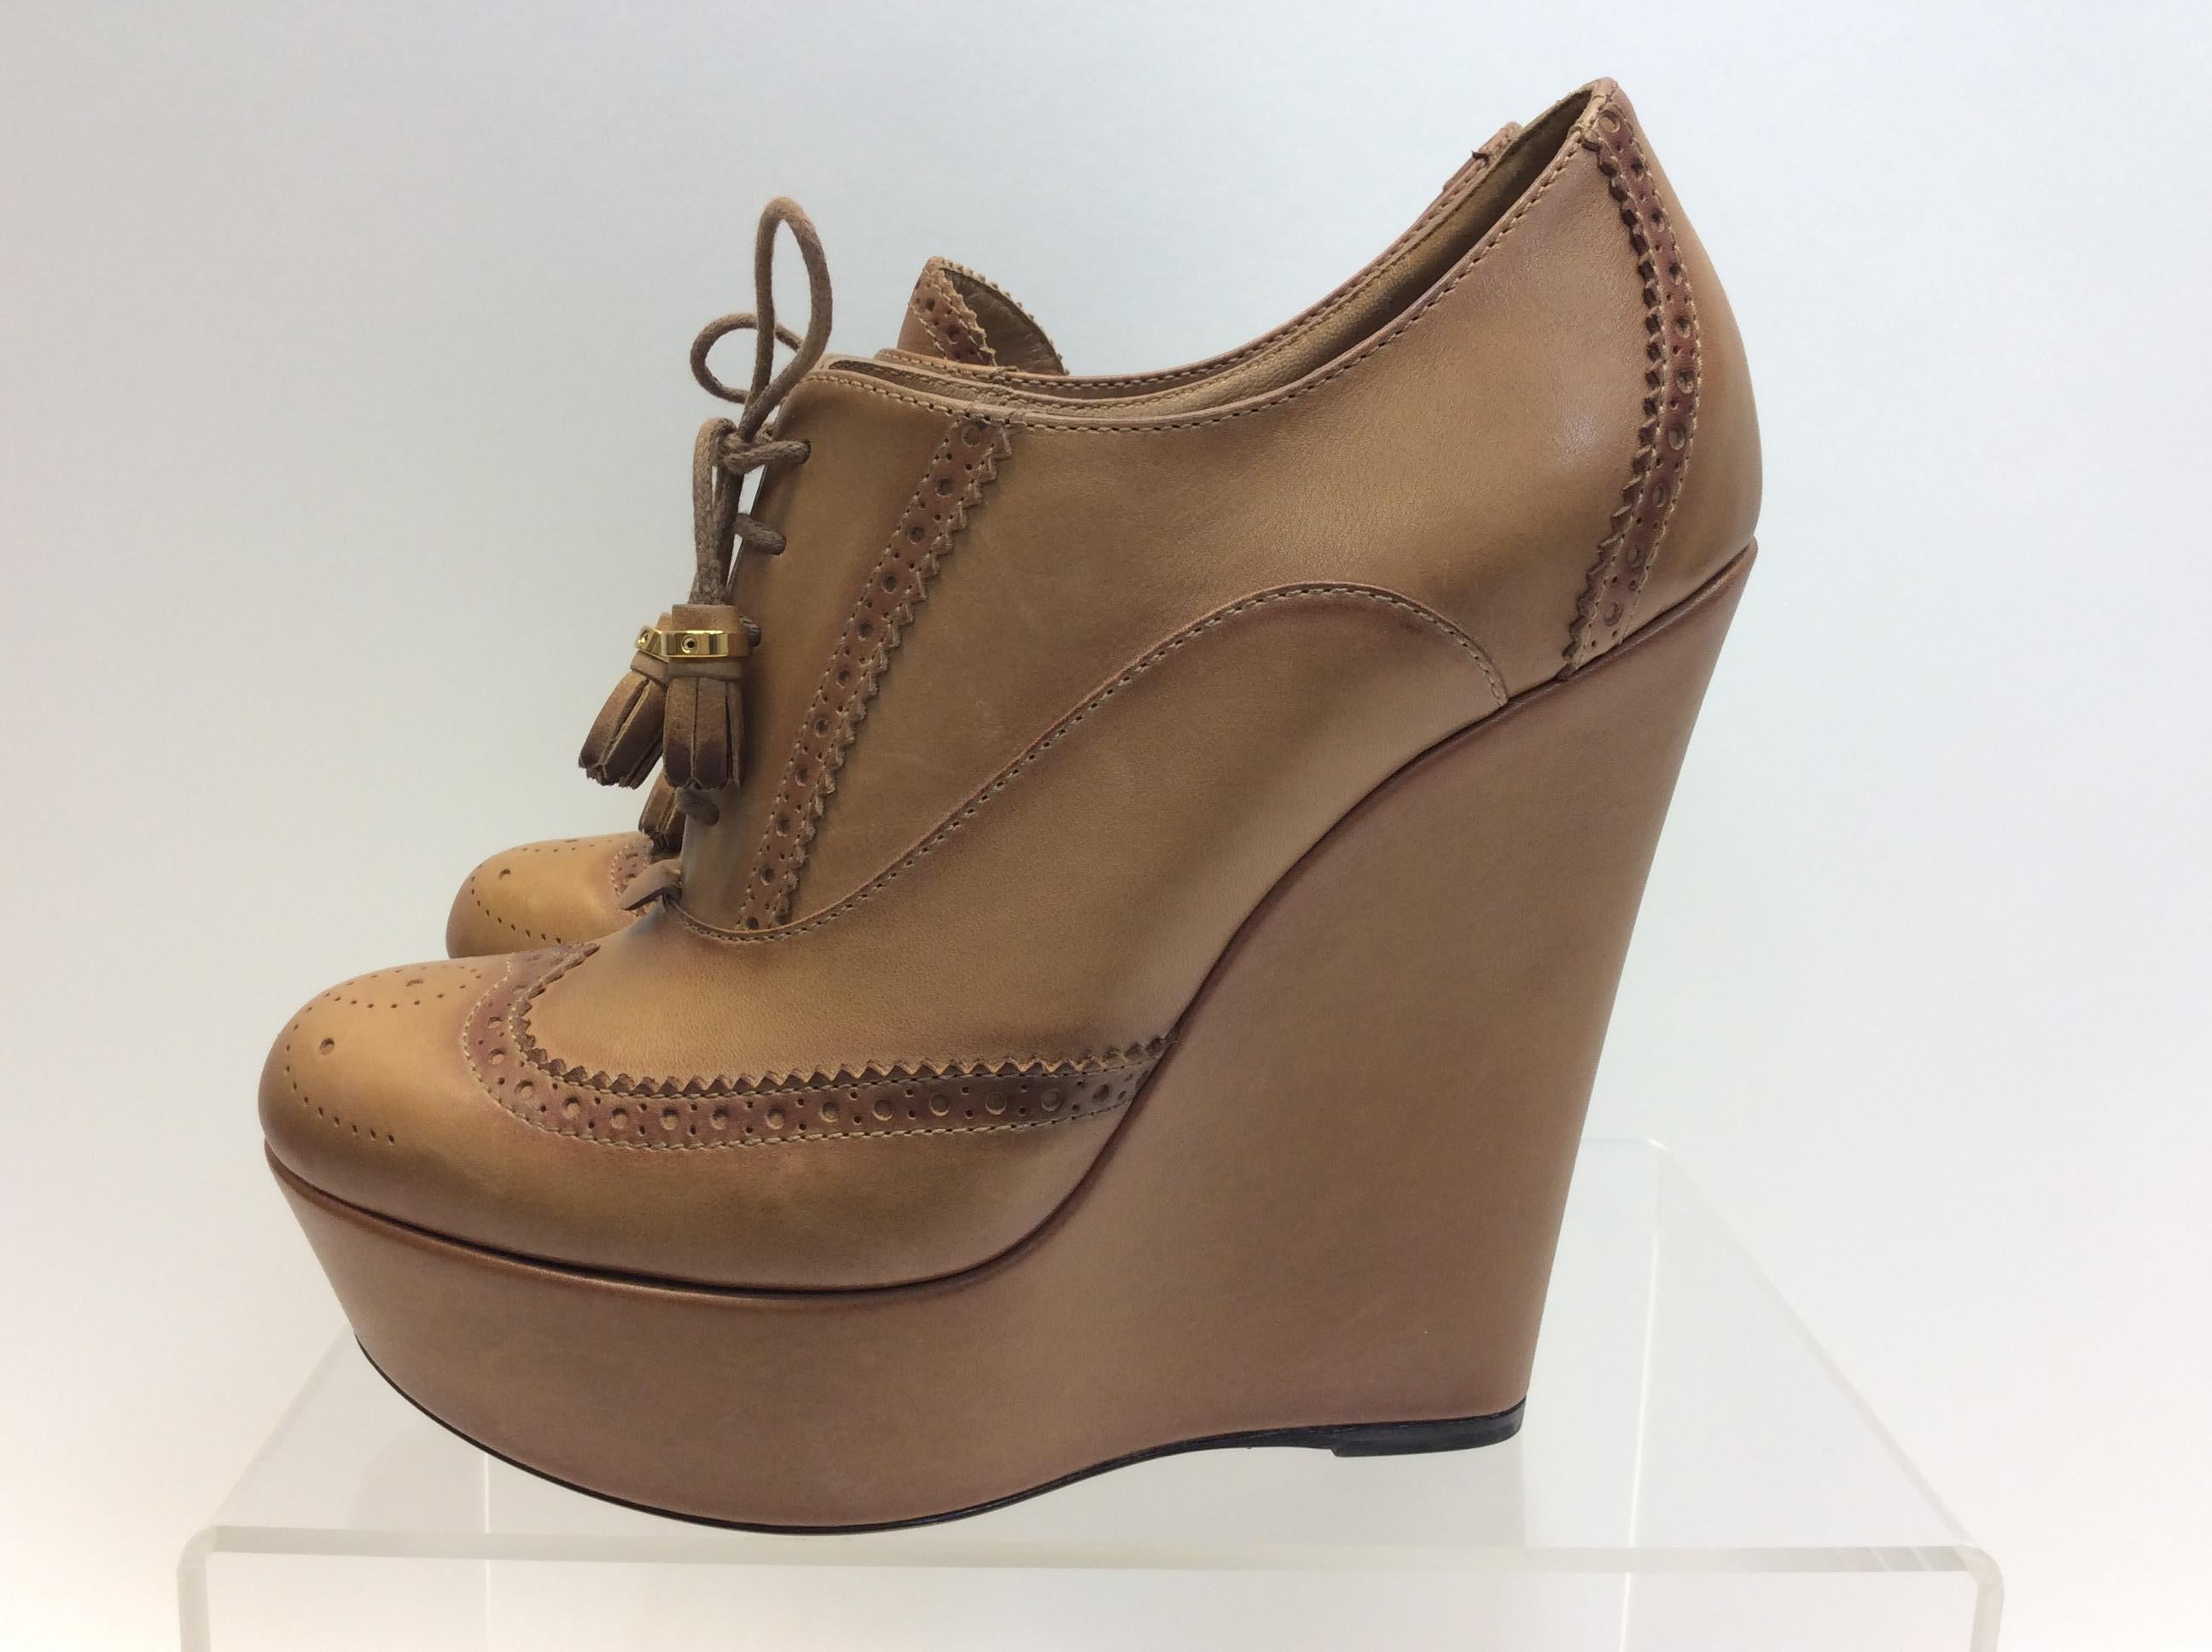 Gucci Tan Leather Lace Up Wedge
$350
Made in Italy
Size 37
5.5” wedge
1.5” platform
